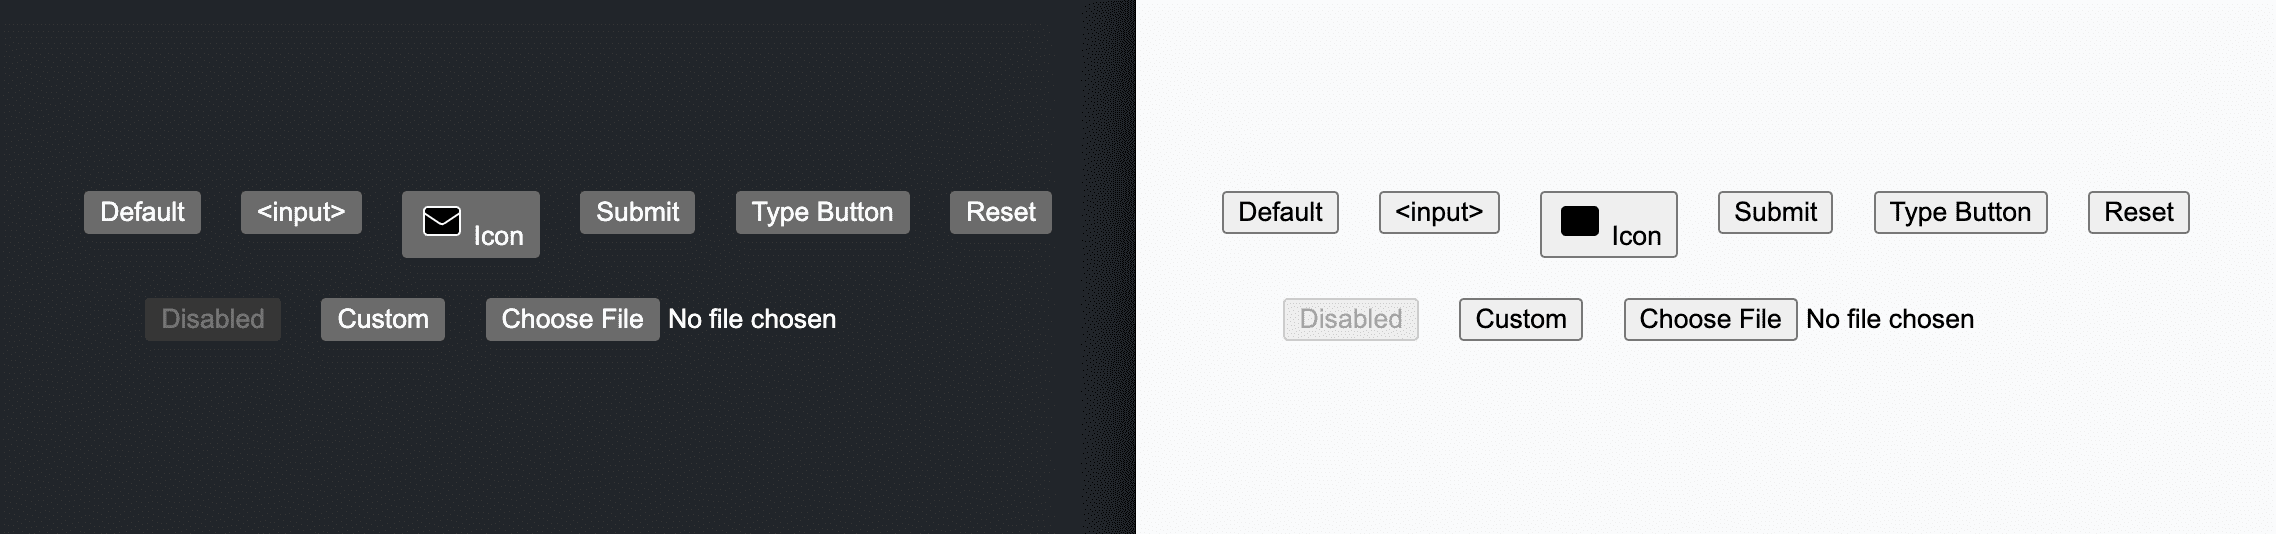 Default buttons show in light and dark theme side by side.